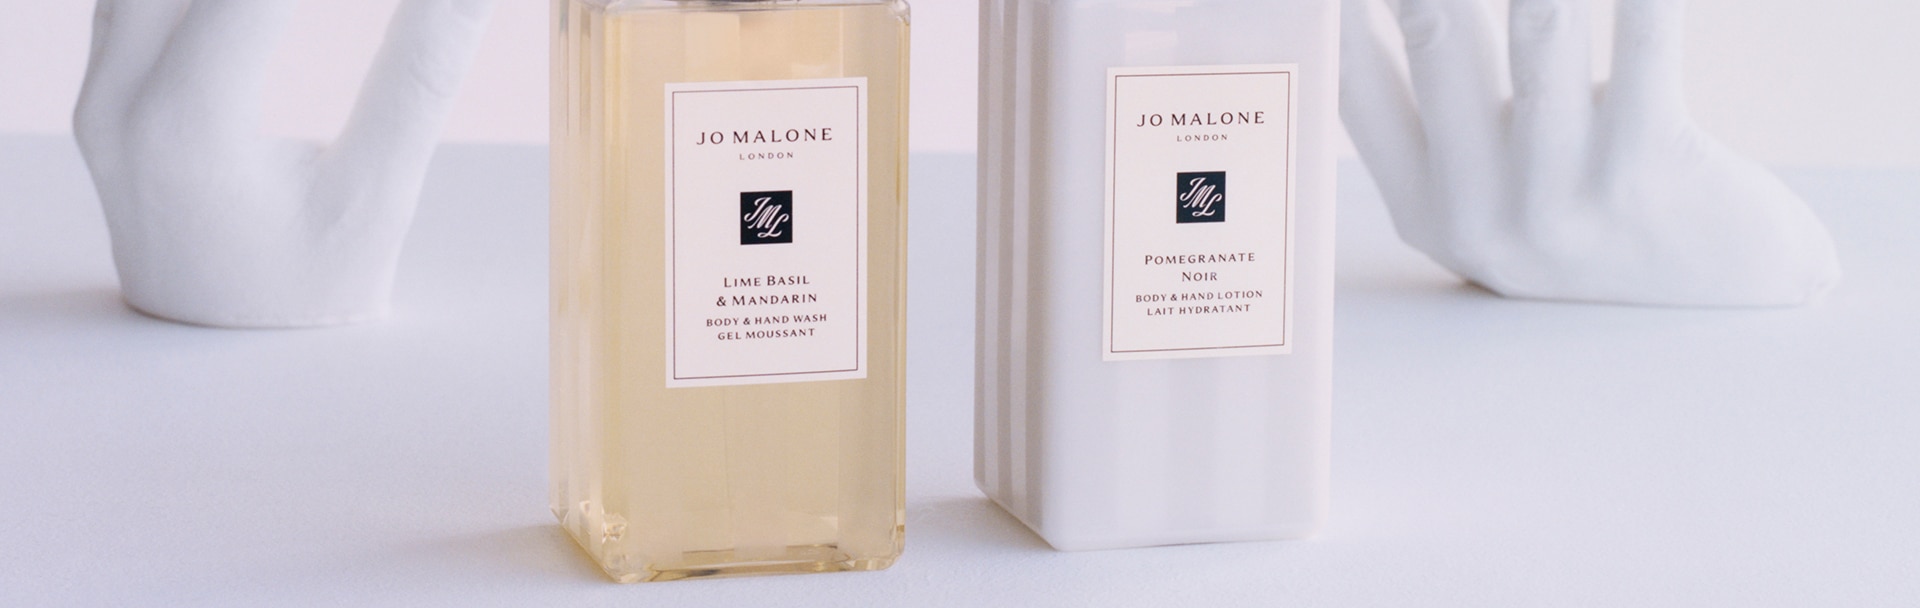 Jo Malone London iconic wash & lotion on a ceramic display tray. 